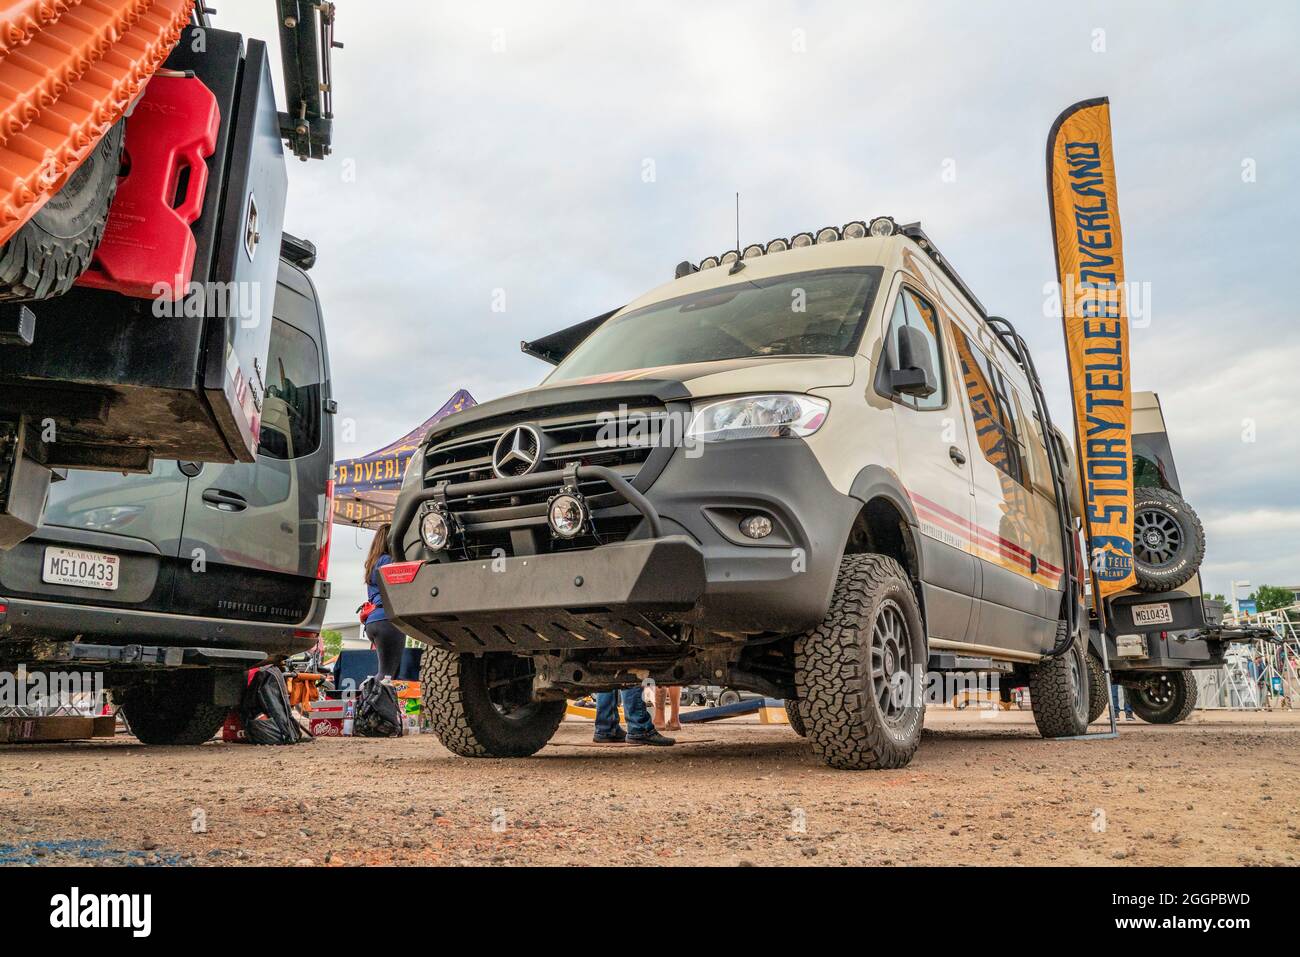 Loveland, CO, USA - August 29, 2021: 4X4 camper van with off-road capabilities by Storyteller Overland (Beast MODE version) at Overland Expo Mountain Stock Photo